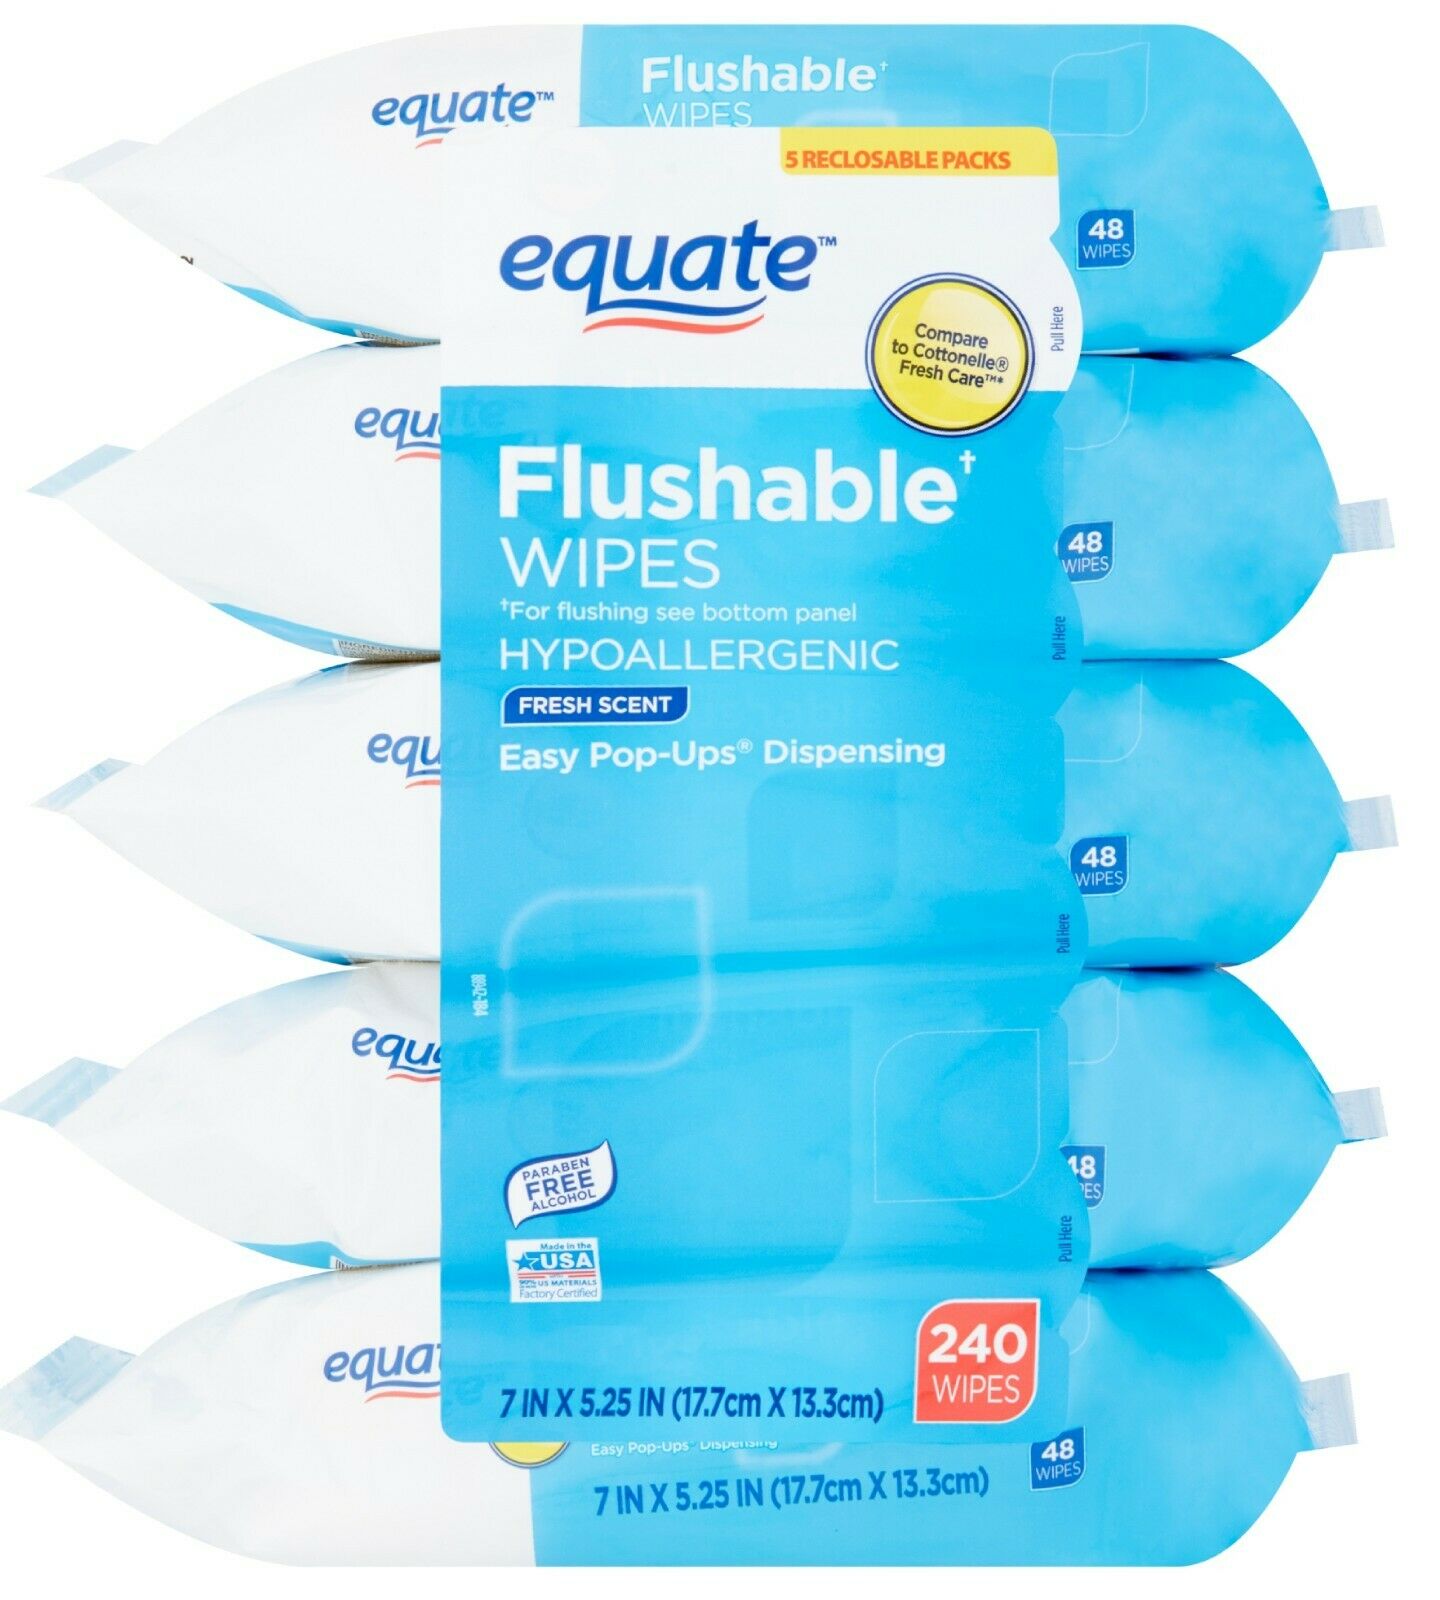 Equate Flushable Wipes, Fresh Scent, 5 Packs Of 48 Wipes, 240 Wipes Total